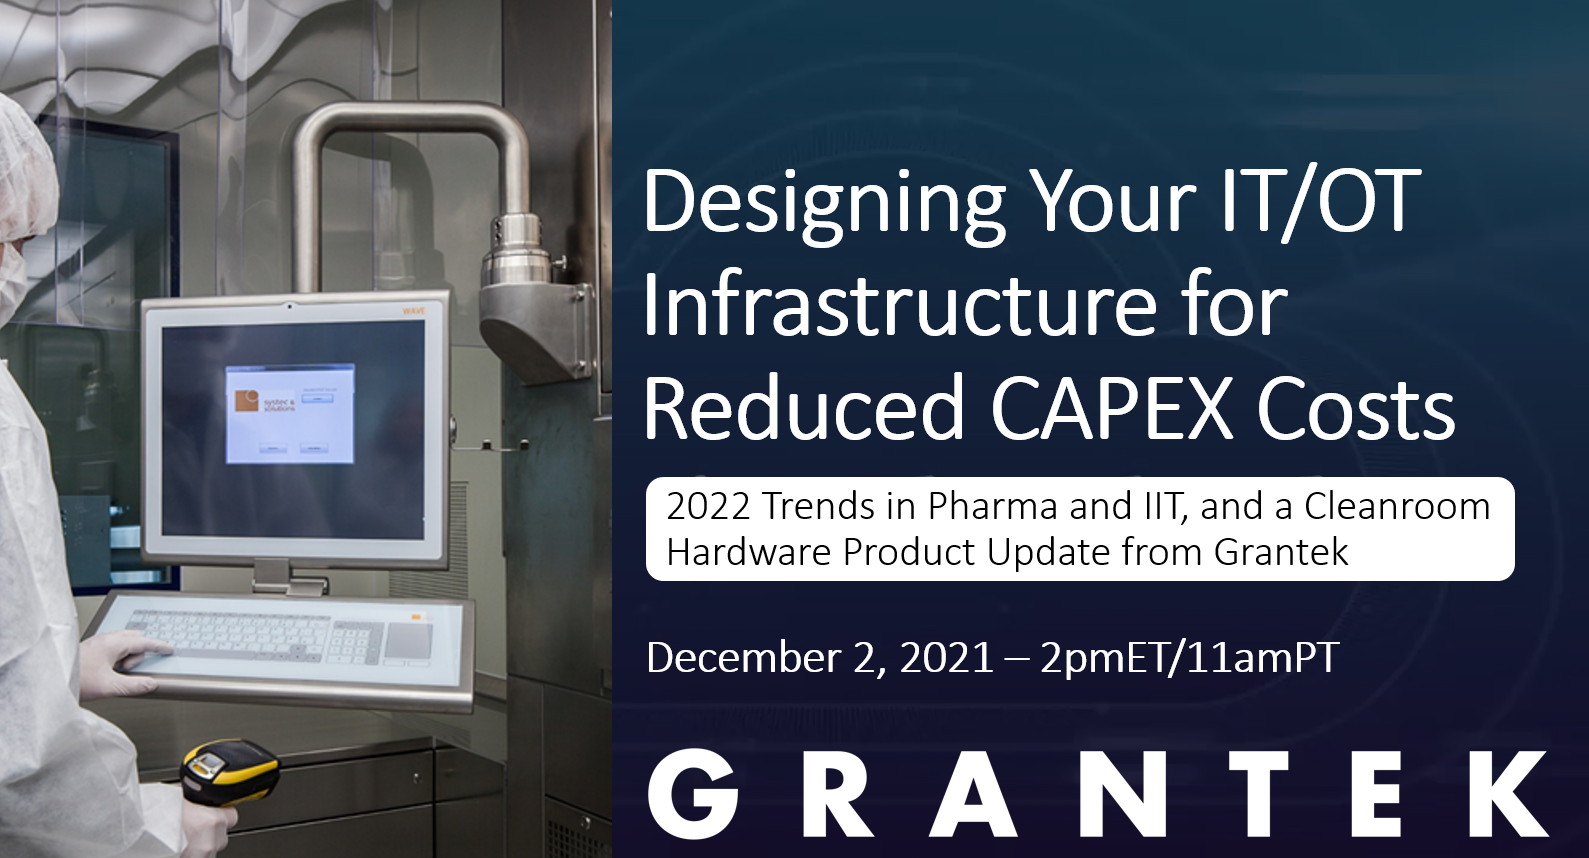 VIDEO – Grantek’s 2022 Trends in Pharma and IIT: Designing Your IT/OT Infrastructure for Reduced CAPEX Costs